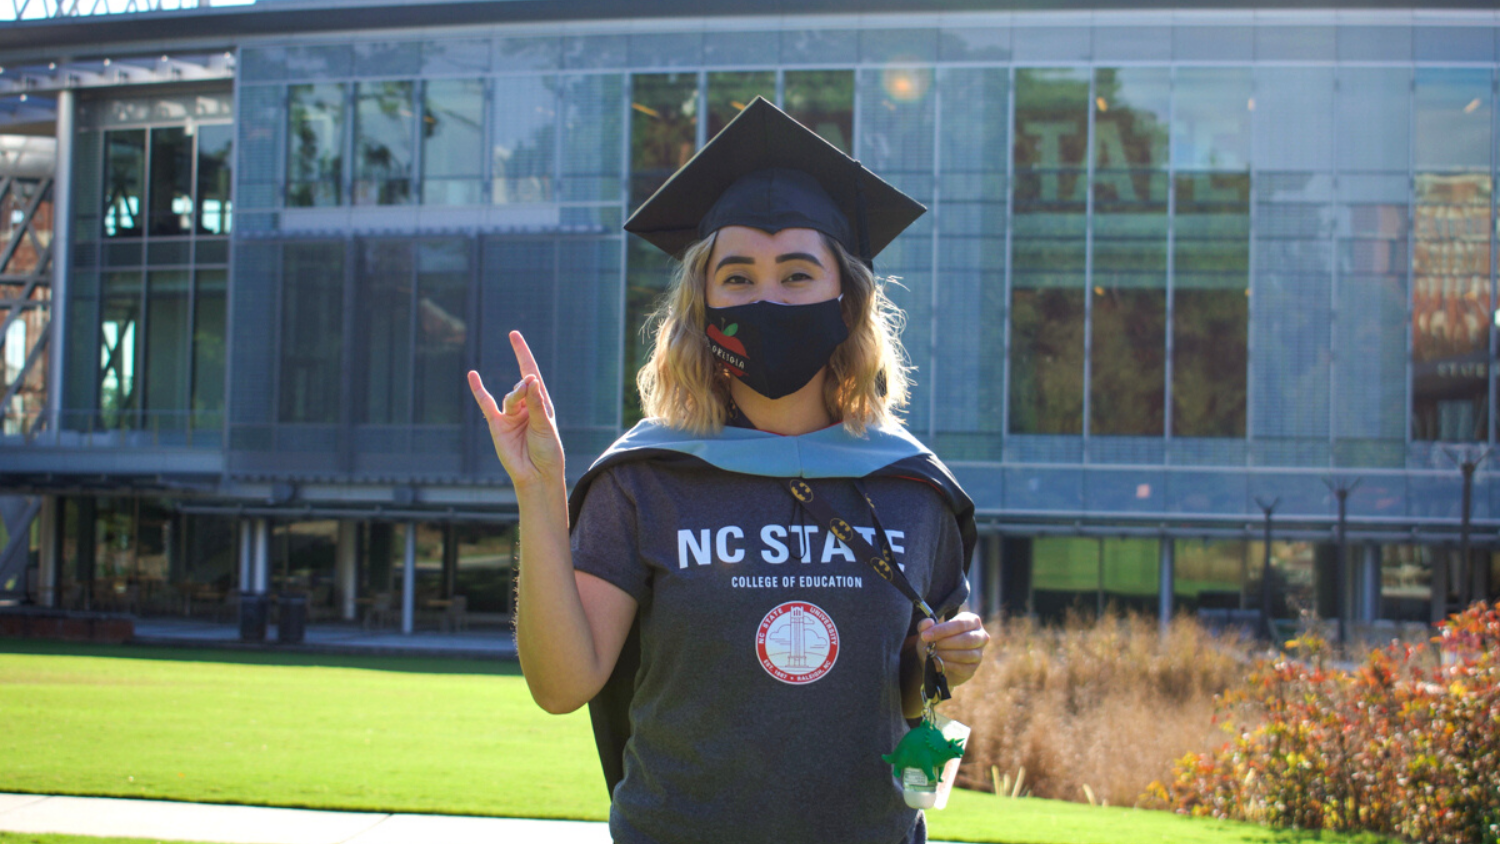 Student poses for photo in a graduation cap and mask in front of Talley Student Union